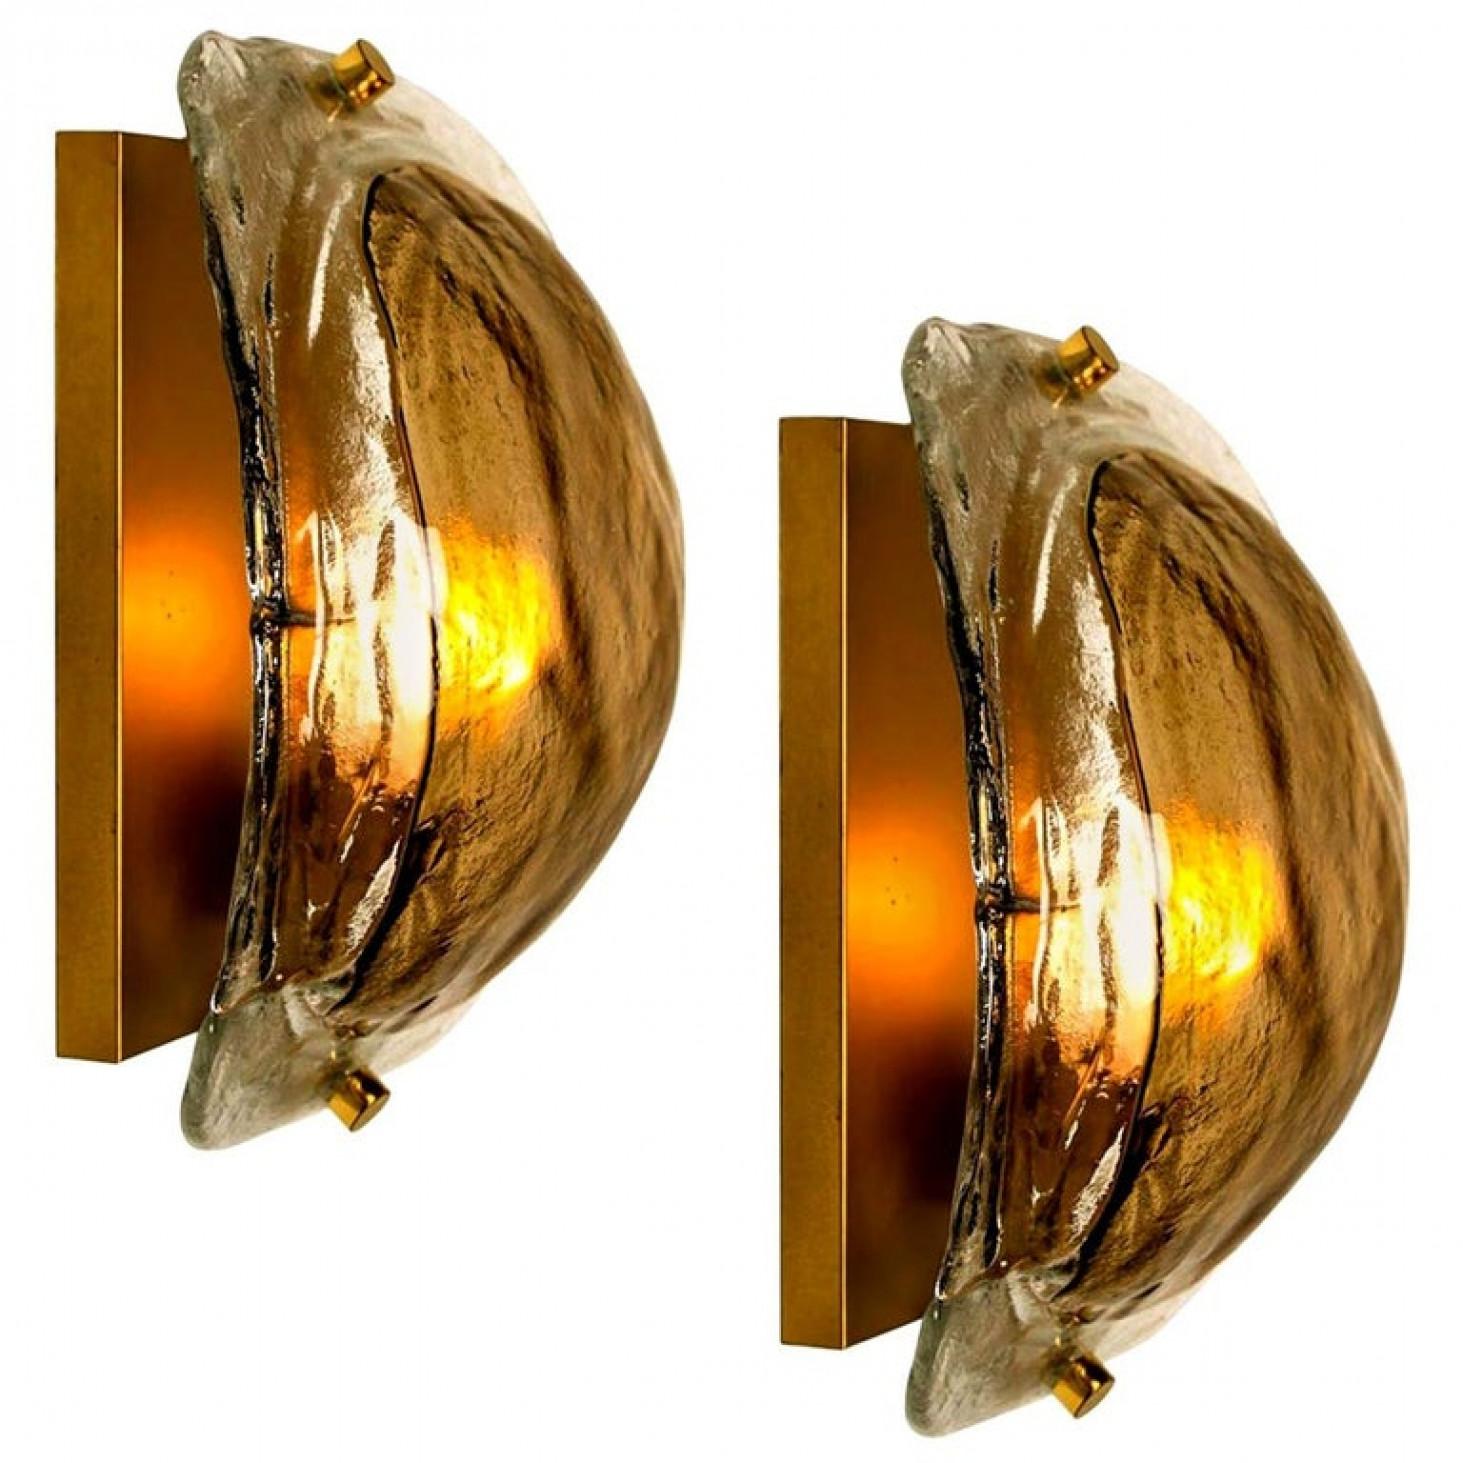 Pair of high end wall sconces made of hand blown clear and opal and brown (smoked) murano glass on a messing hardware designed and produced by J.T. Kalmar, Austria in the 1960s. Minimalistic design executed with a taste for excellence in